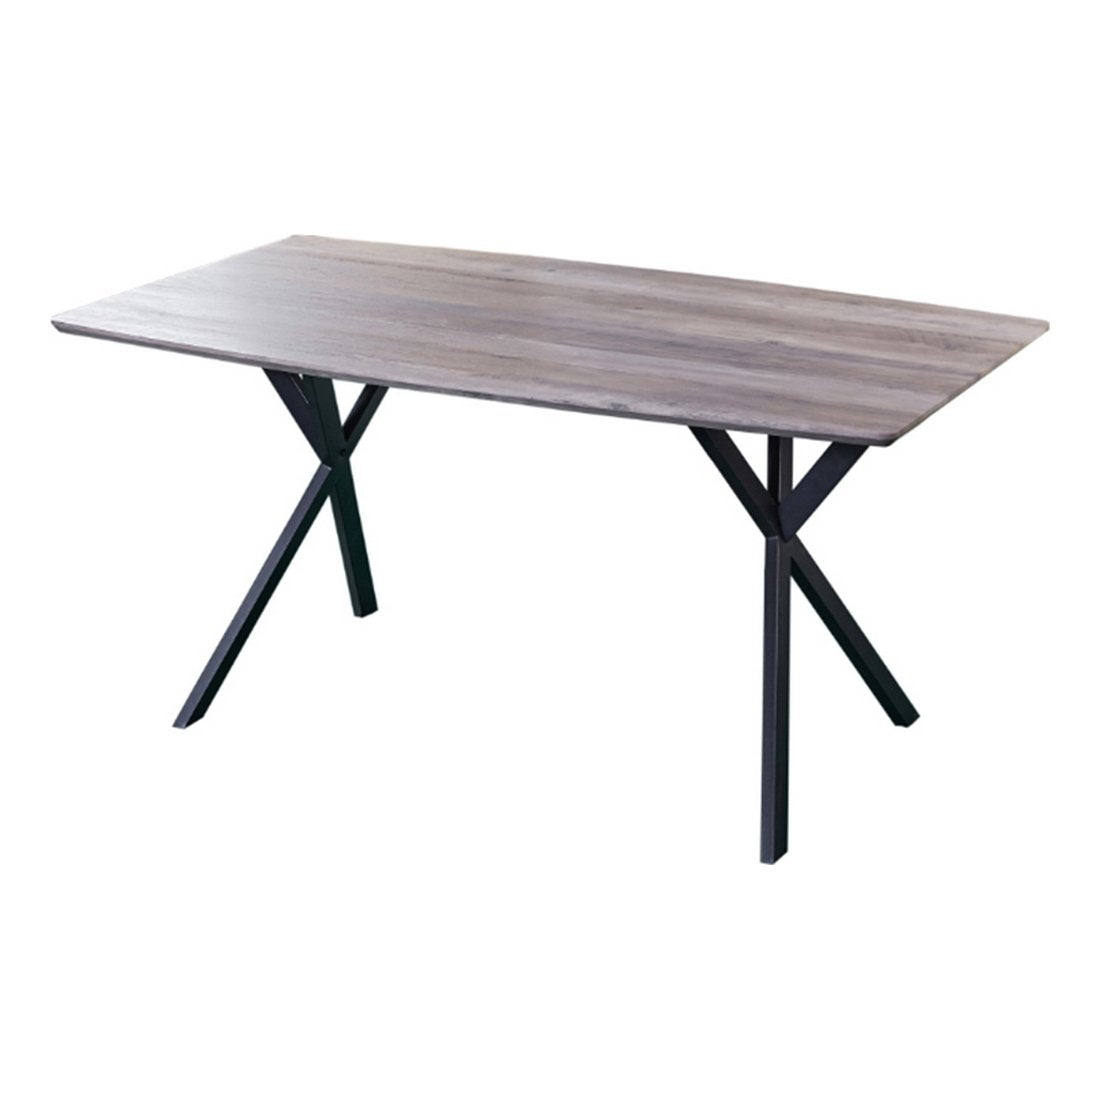 Rox Dining Table